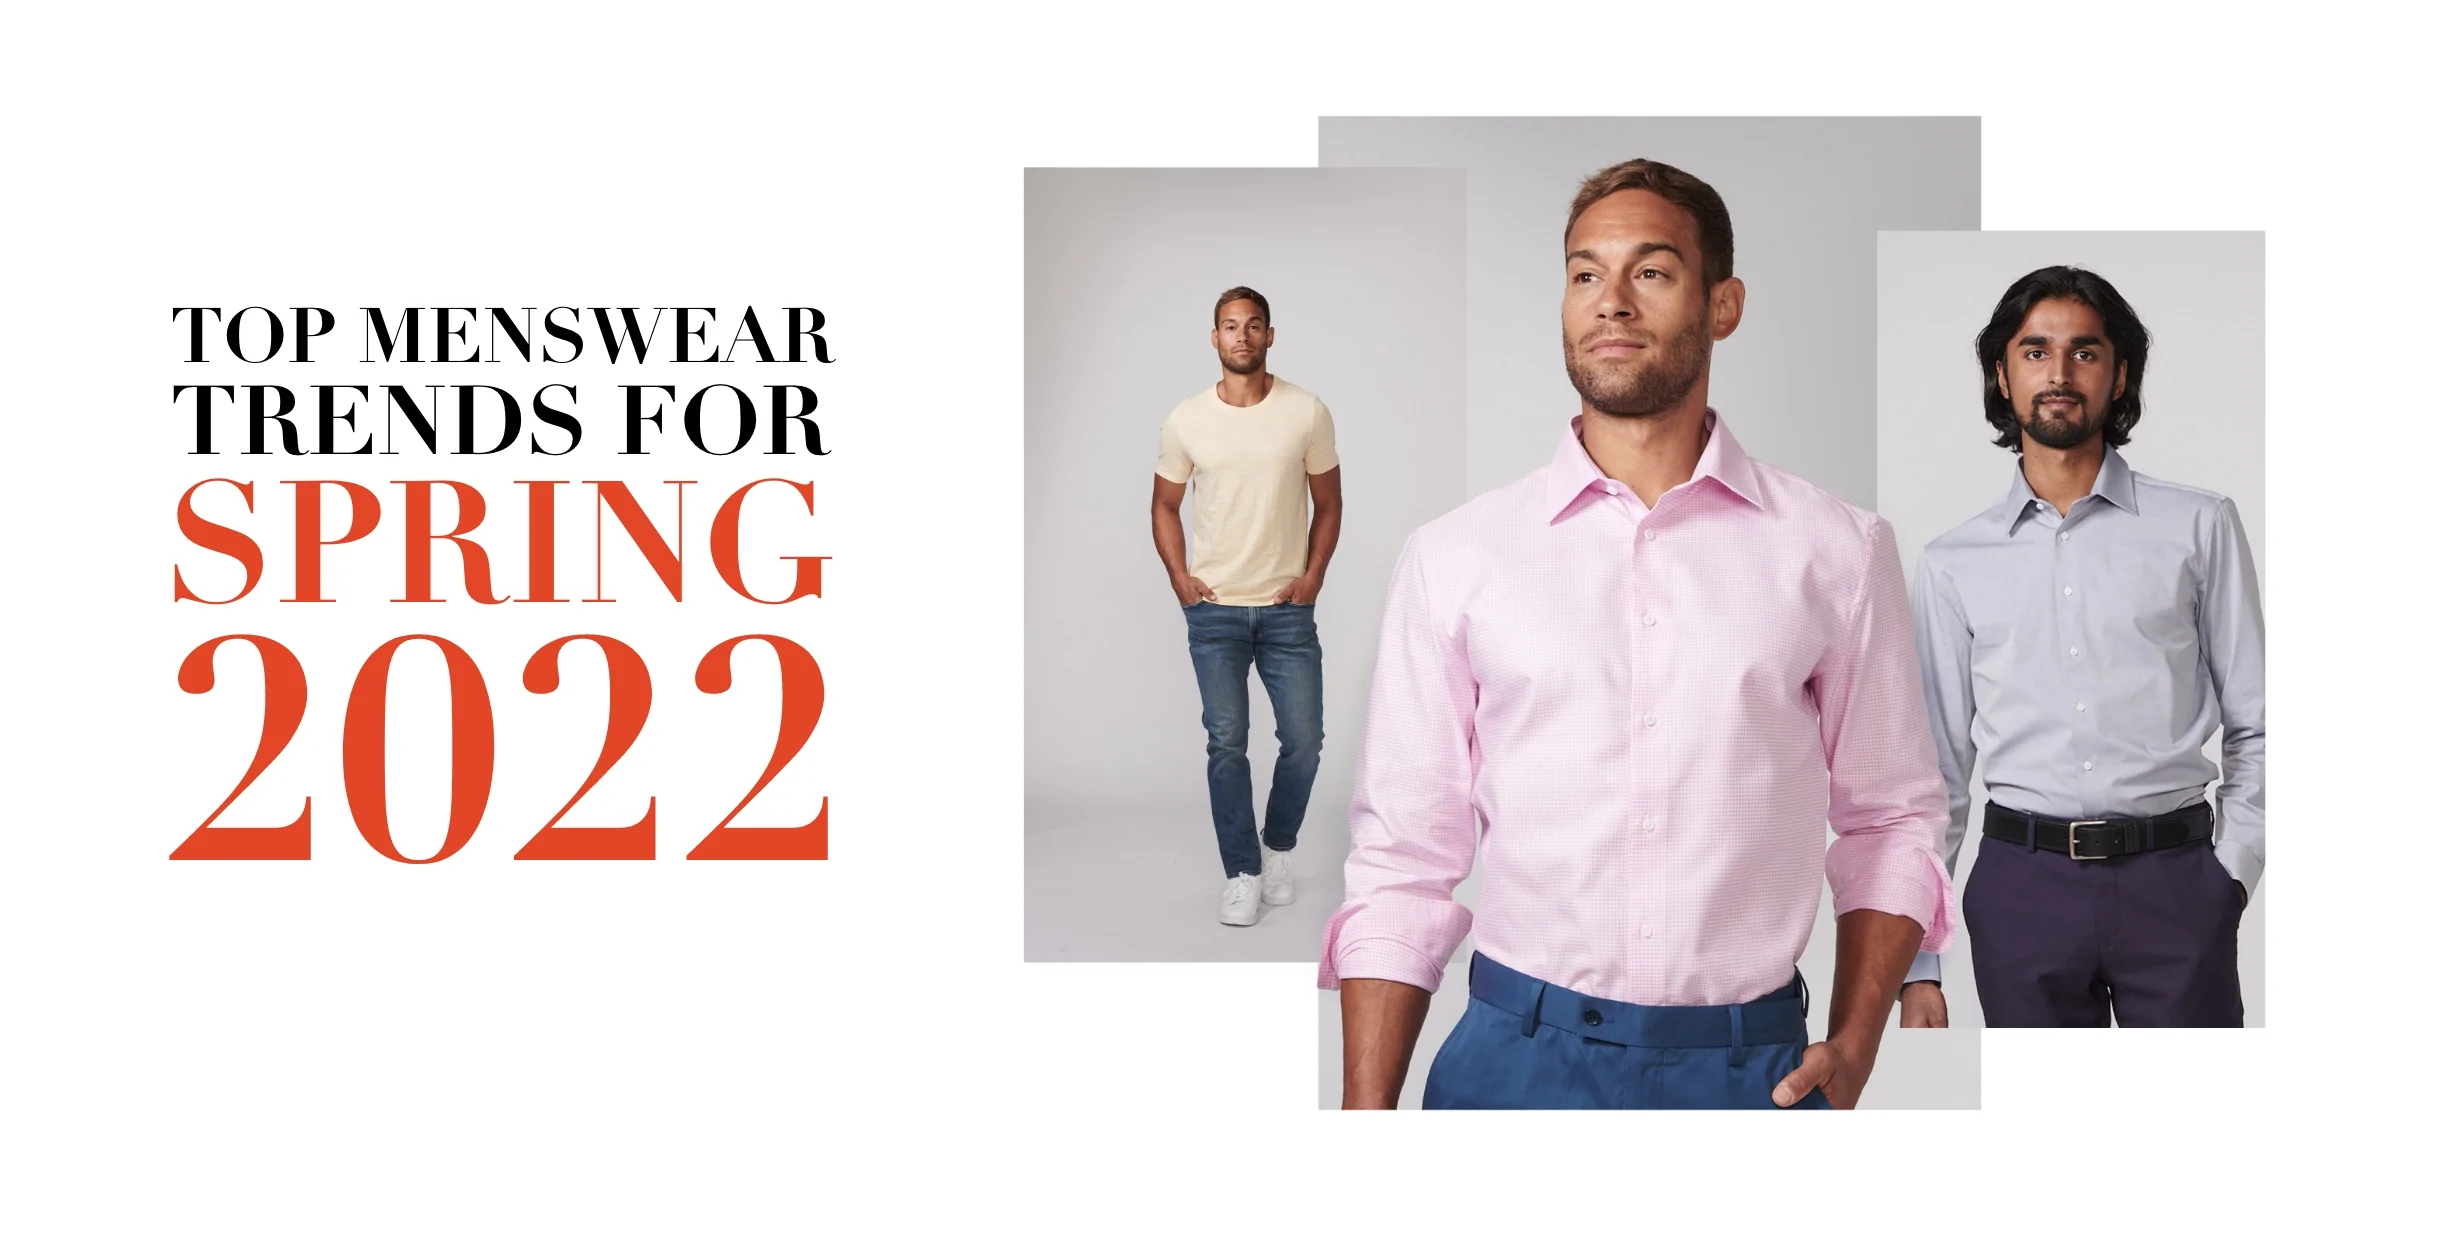 Top Menswear Trends for 2022